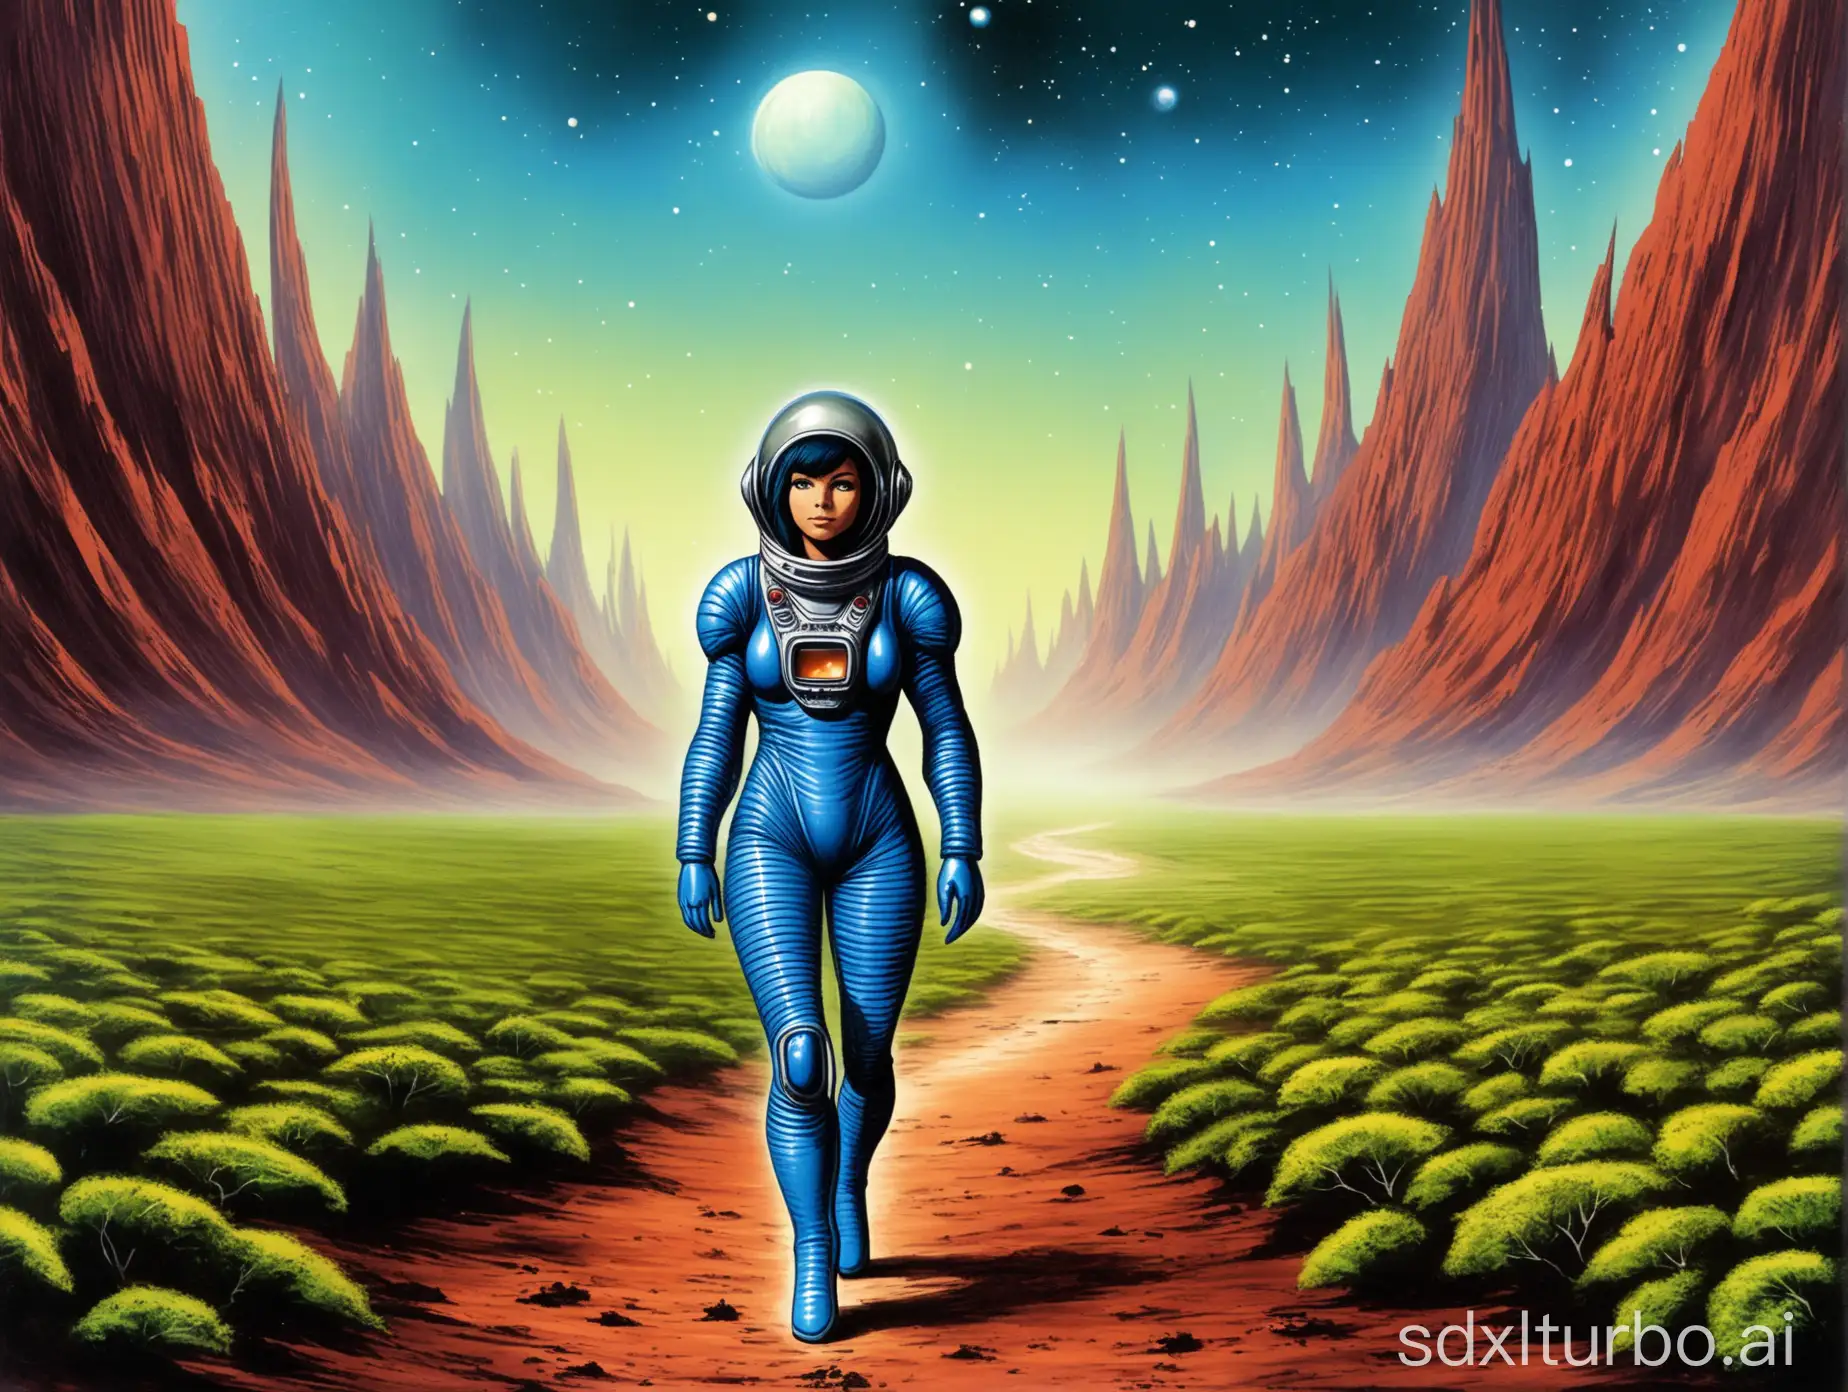 mirona thetin from perry rhodan in space suit wandering in landscape